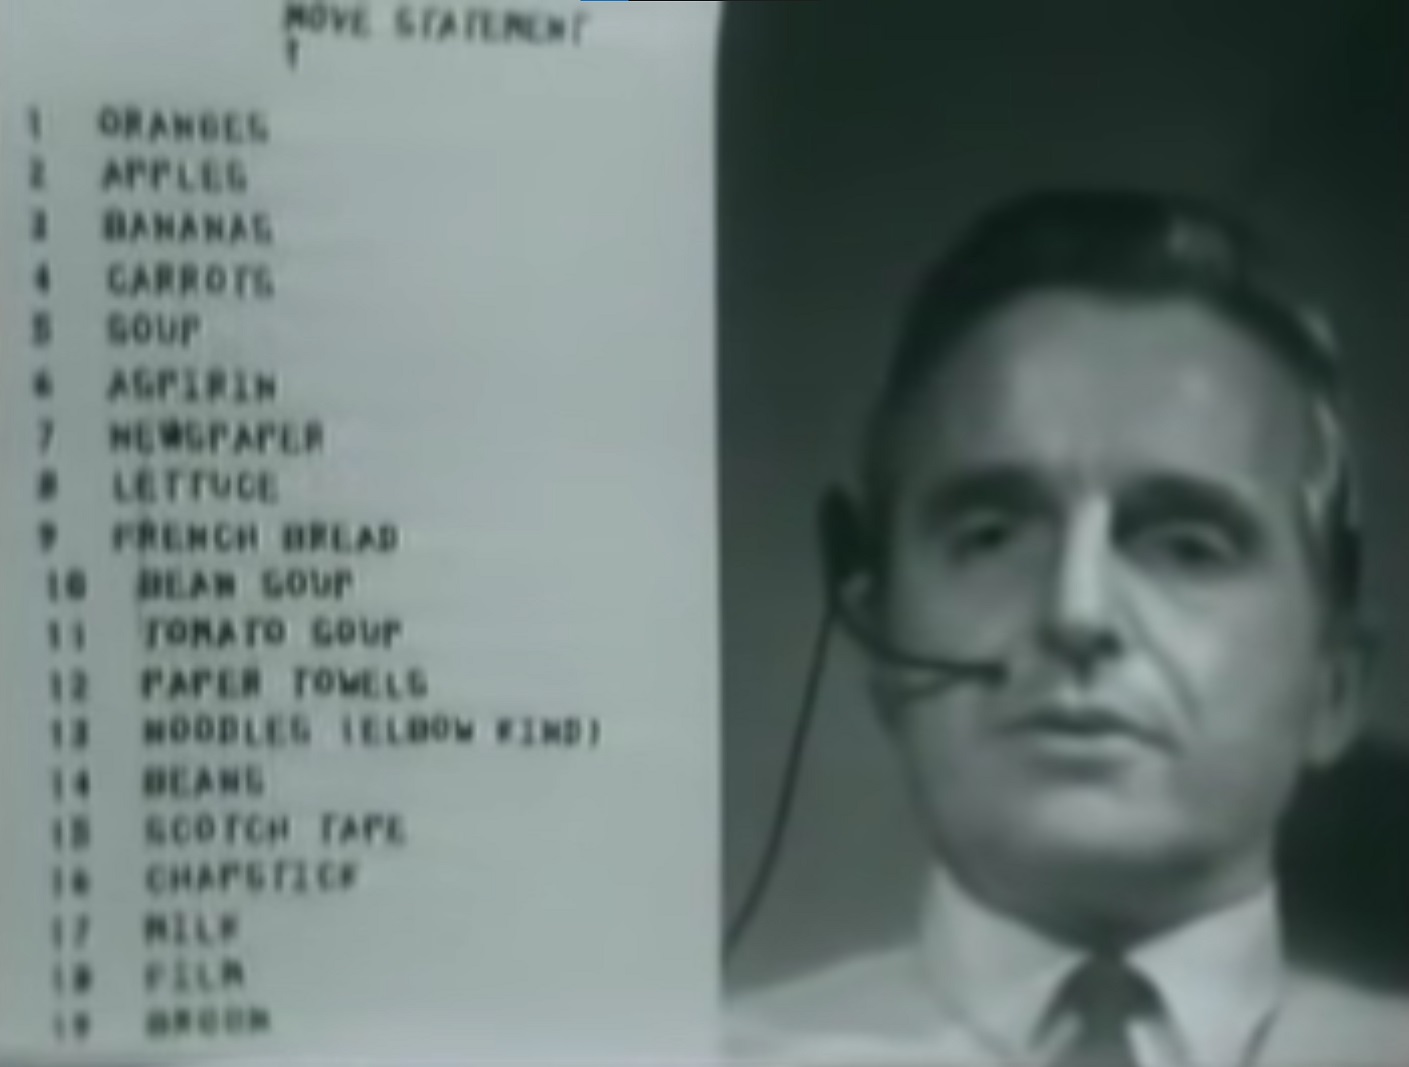 Douglas Engelbart’s performance in “The mother of all demos”